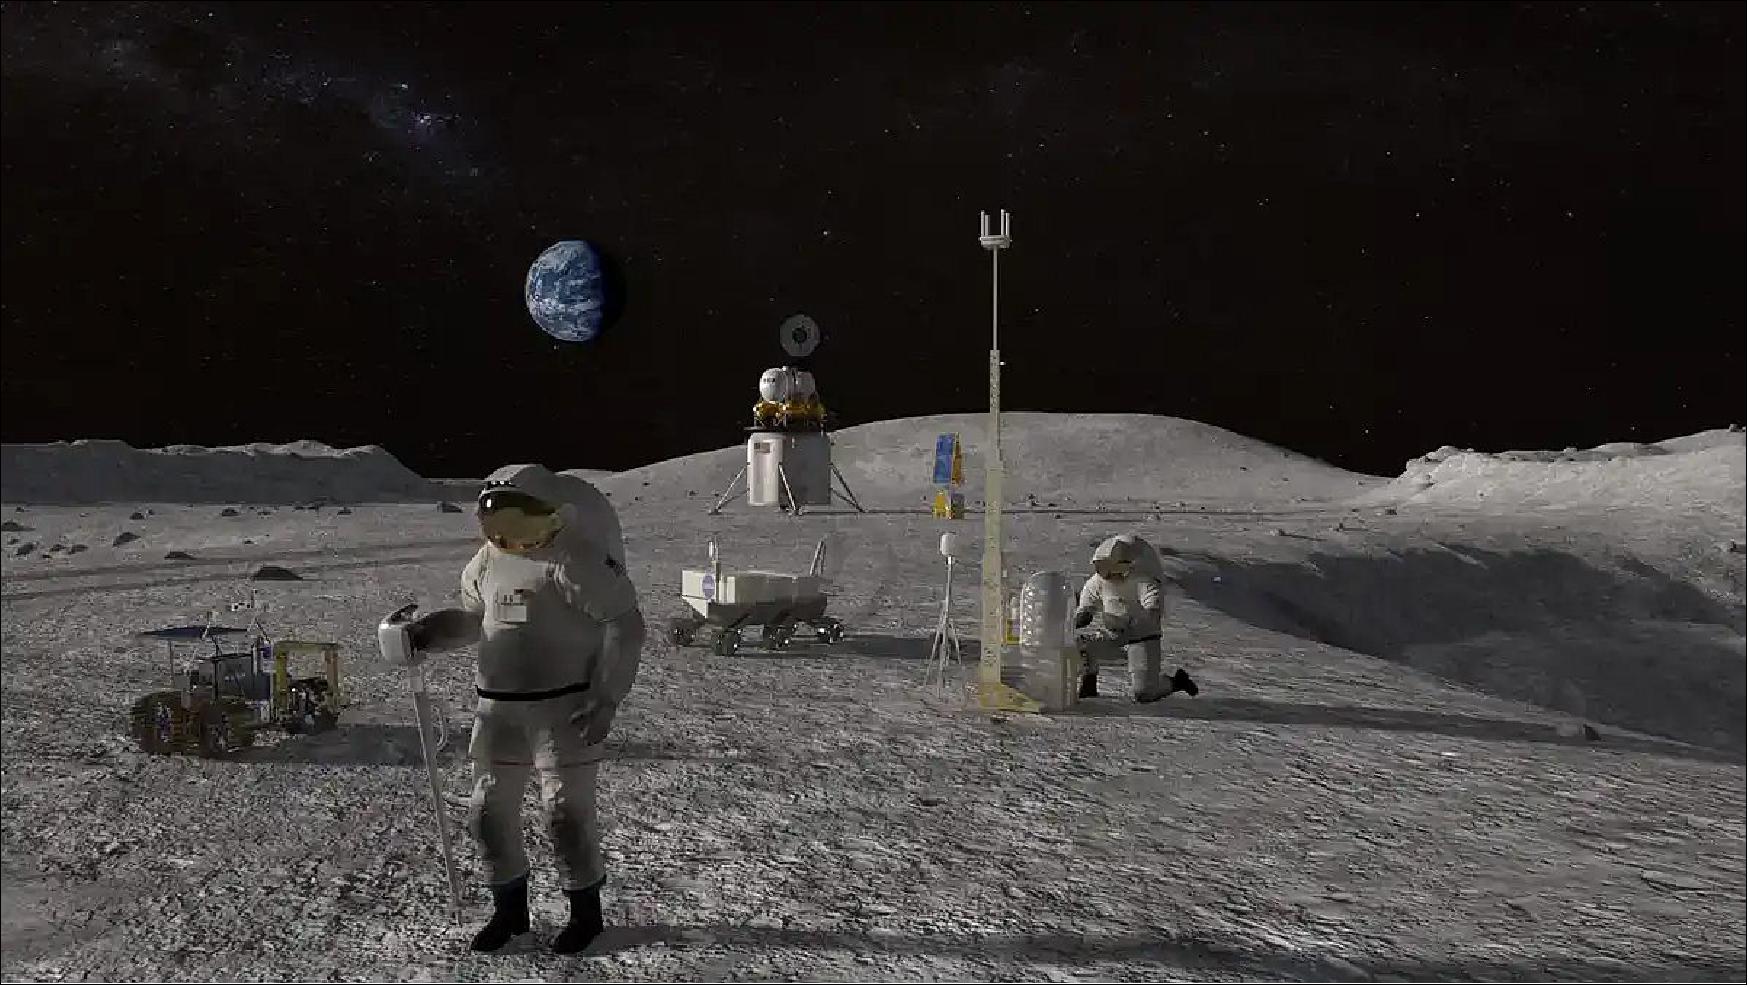 Figure 20: Artist's concept of Artemis astronauts performing research on the lunar surface (image credit: NASA)